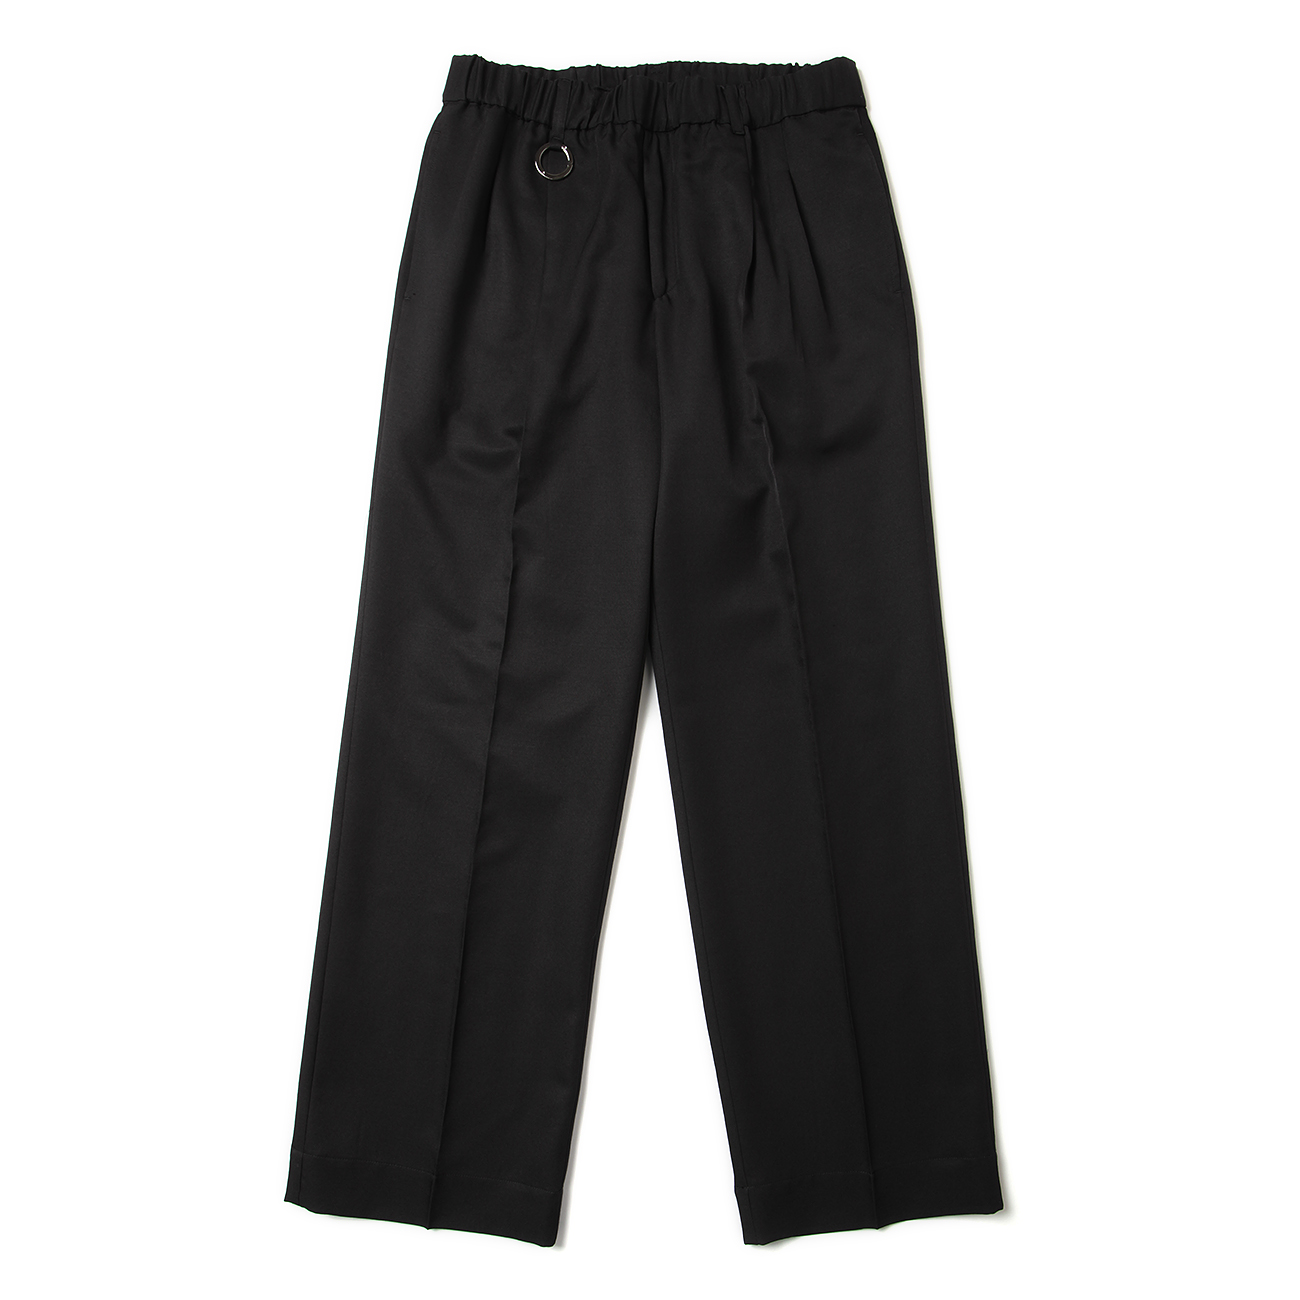 th products QUINN/Wide Tailored Pants - スラックス